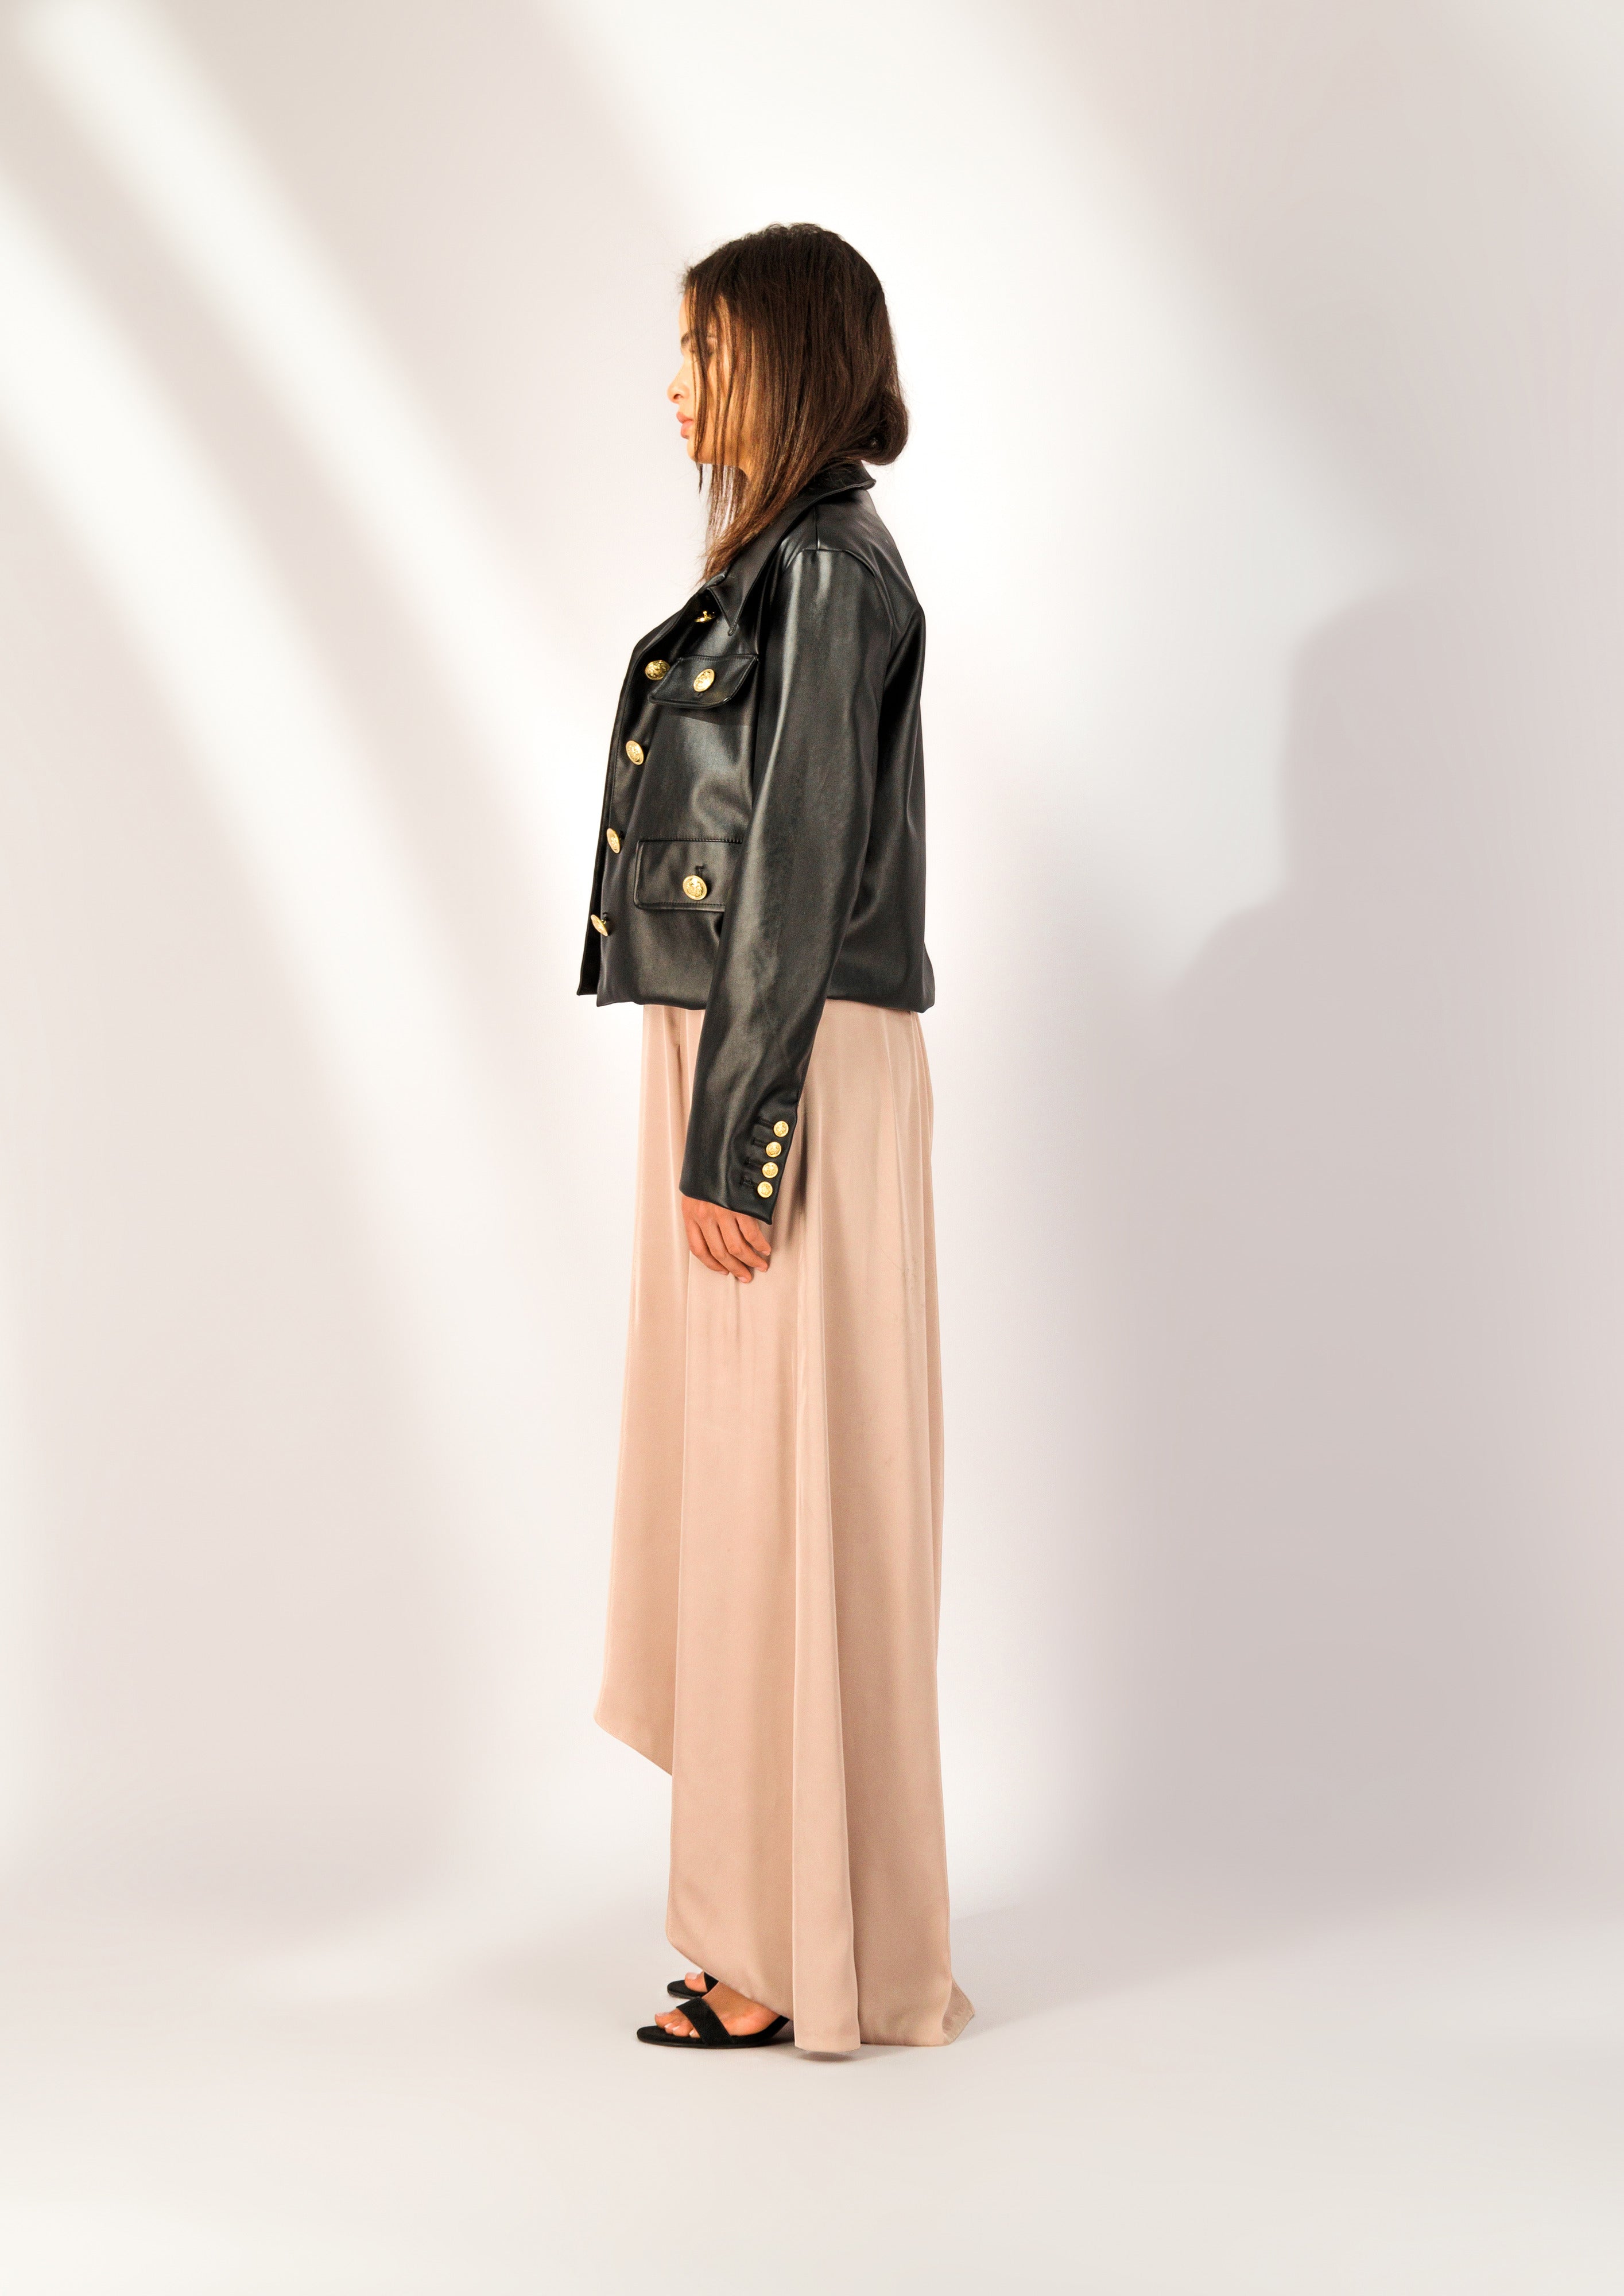 Faux Leather Clothing, Faux Leather Pants, Jackets, Skirts & Shorts